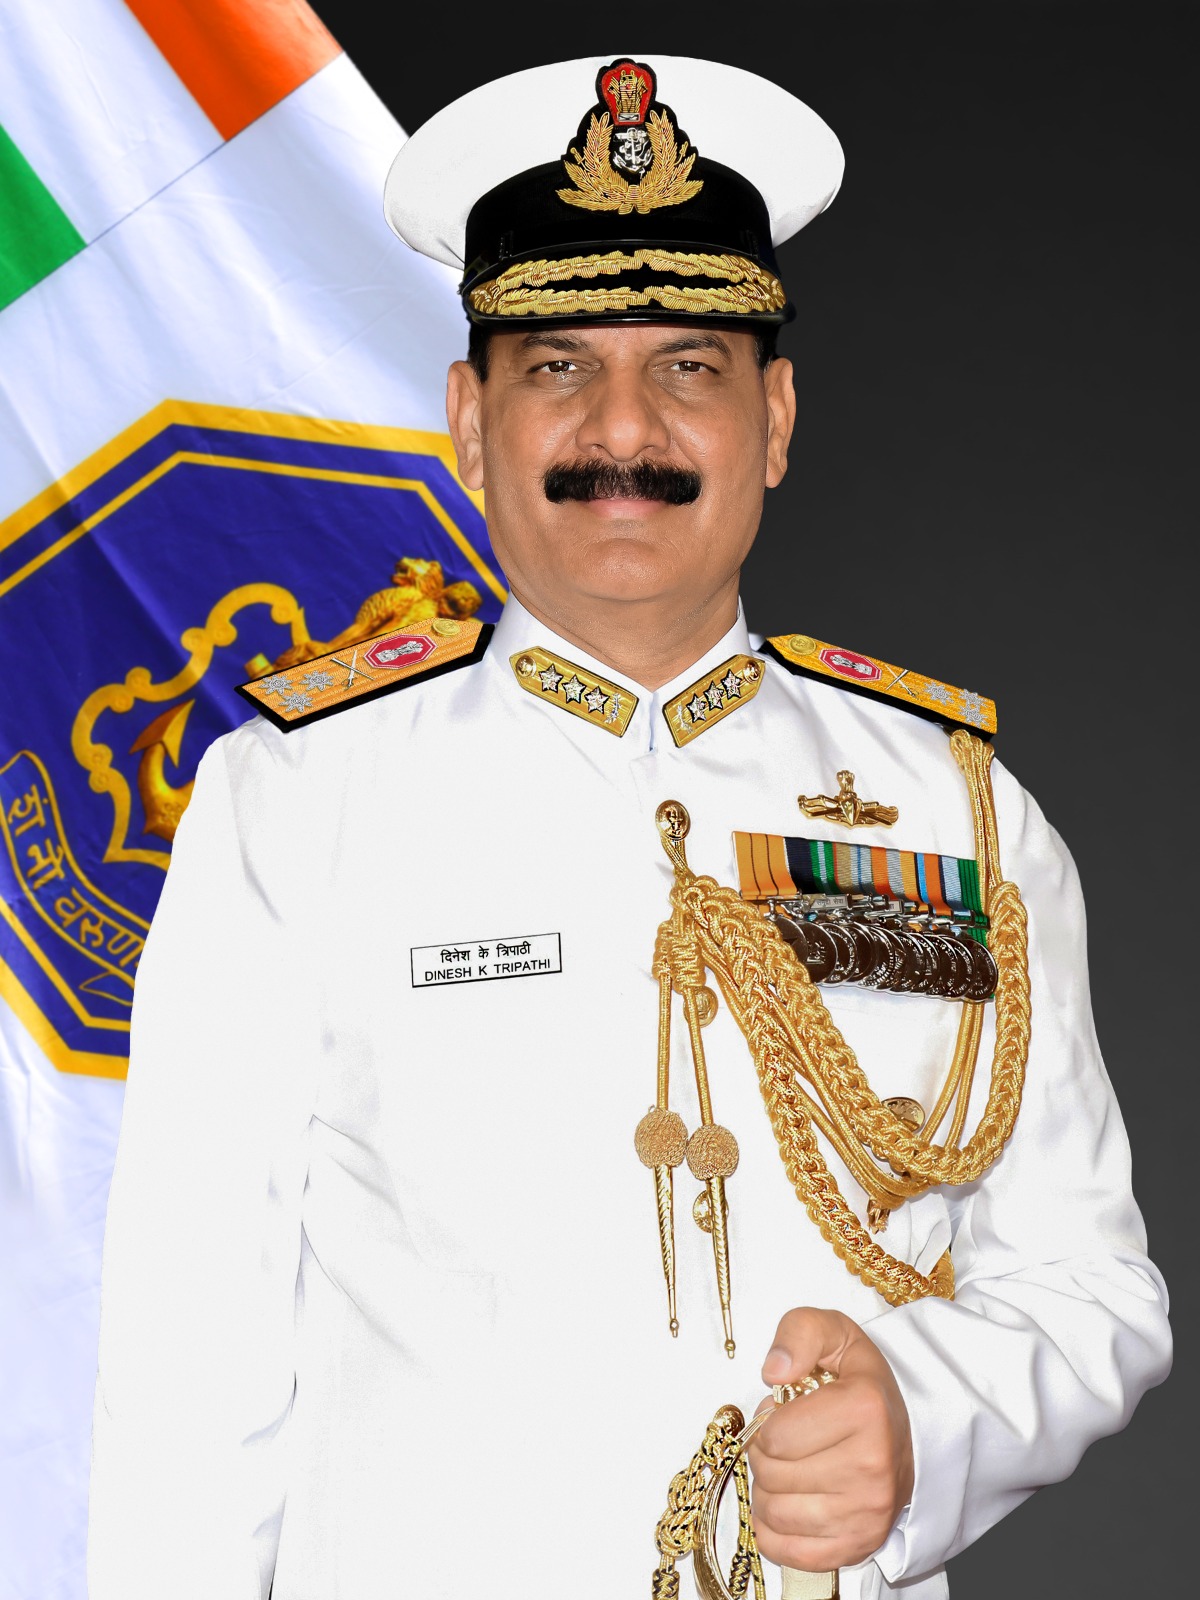 Project-Your-State-vice-admiral-dinesh-kumar-tripathi-appointed-as-the-next-chief-of-the-naval-staff